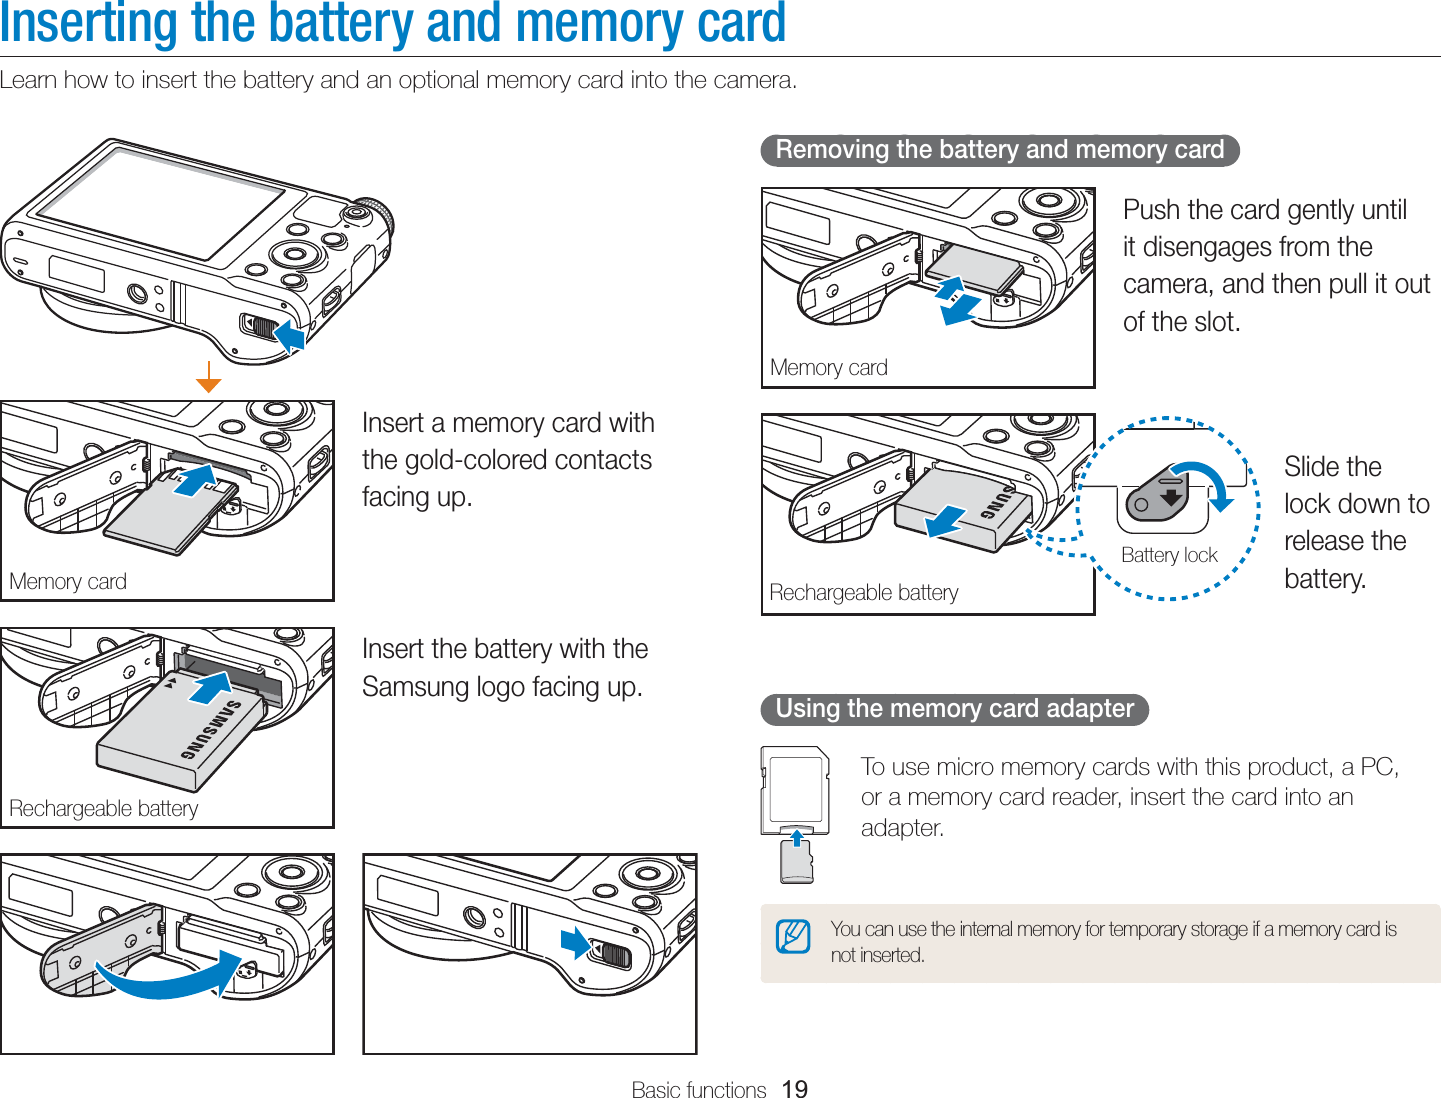 Basic functions  19Inserting the battery and memory cardLearn how to insert the battery and an optional memory card into the camera. Removing the battery and memory cardMemory cardPush the card gently until it disengages from the camera, and then pull it out of the slot.Rechargeable batteryBattery lockSlide the lock down to release the battery.Using the memory card adapterTo use micro memory cards with this product, a PC,  or a memory card reader, insert the card into an adapter.You can use the internal memory for temporary storage if a memory card is not inserted.Memory cardInsert a memory card with the gold-colored contacts facing up.Rechargeable batteryInsert the battery with the Samsung logo facing up.